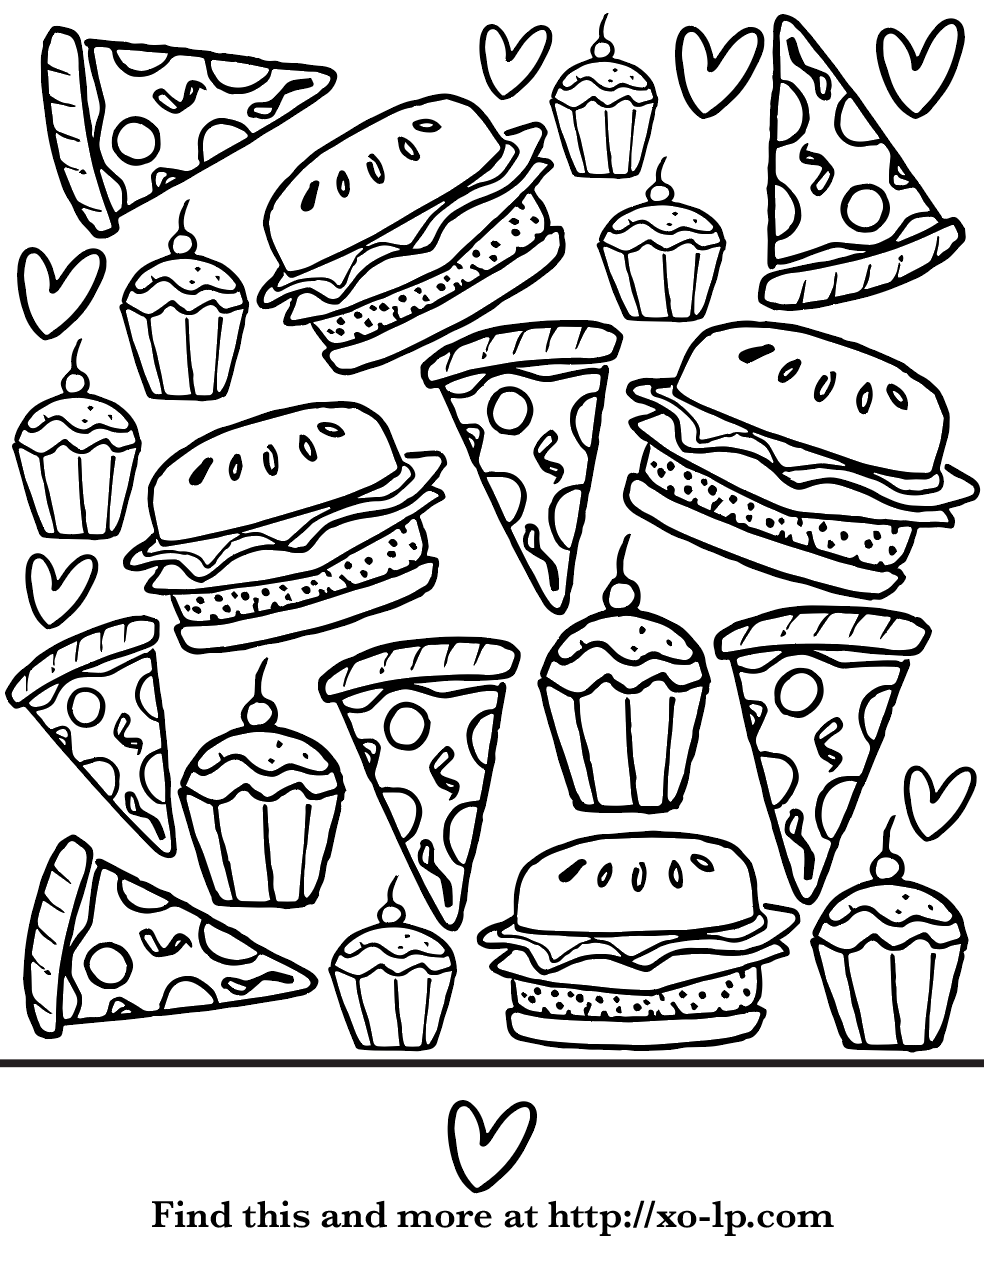 Summer Food Coloring Page — XO LP